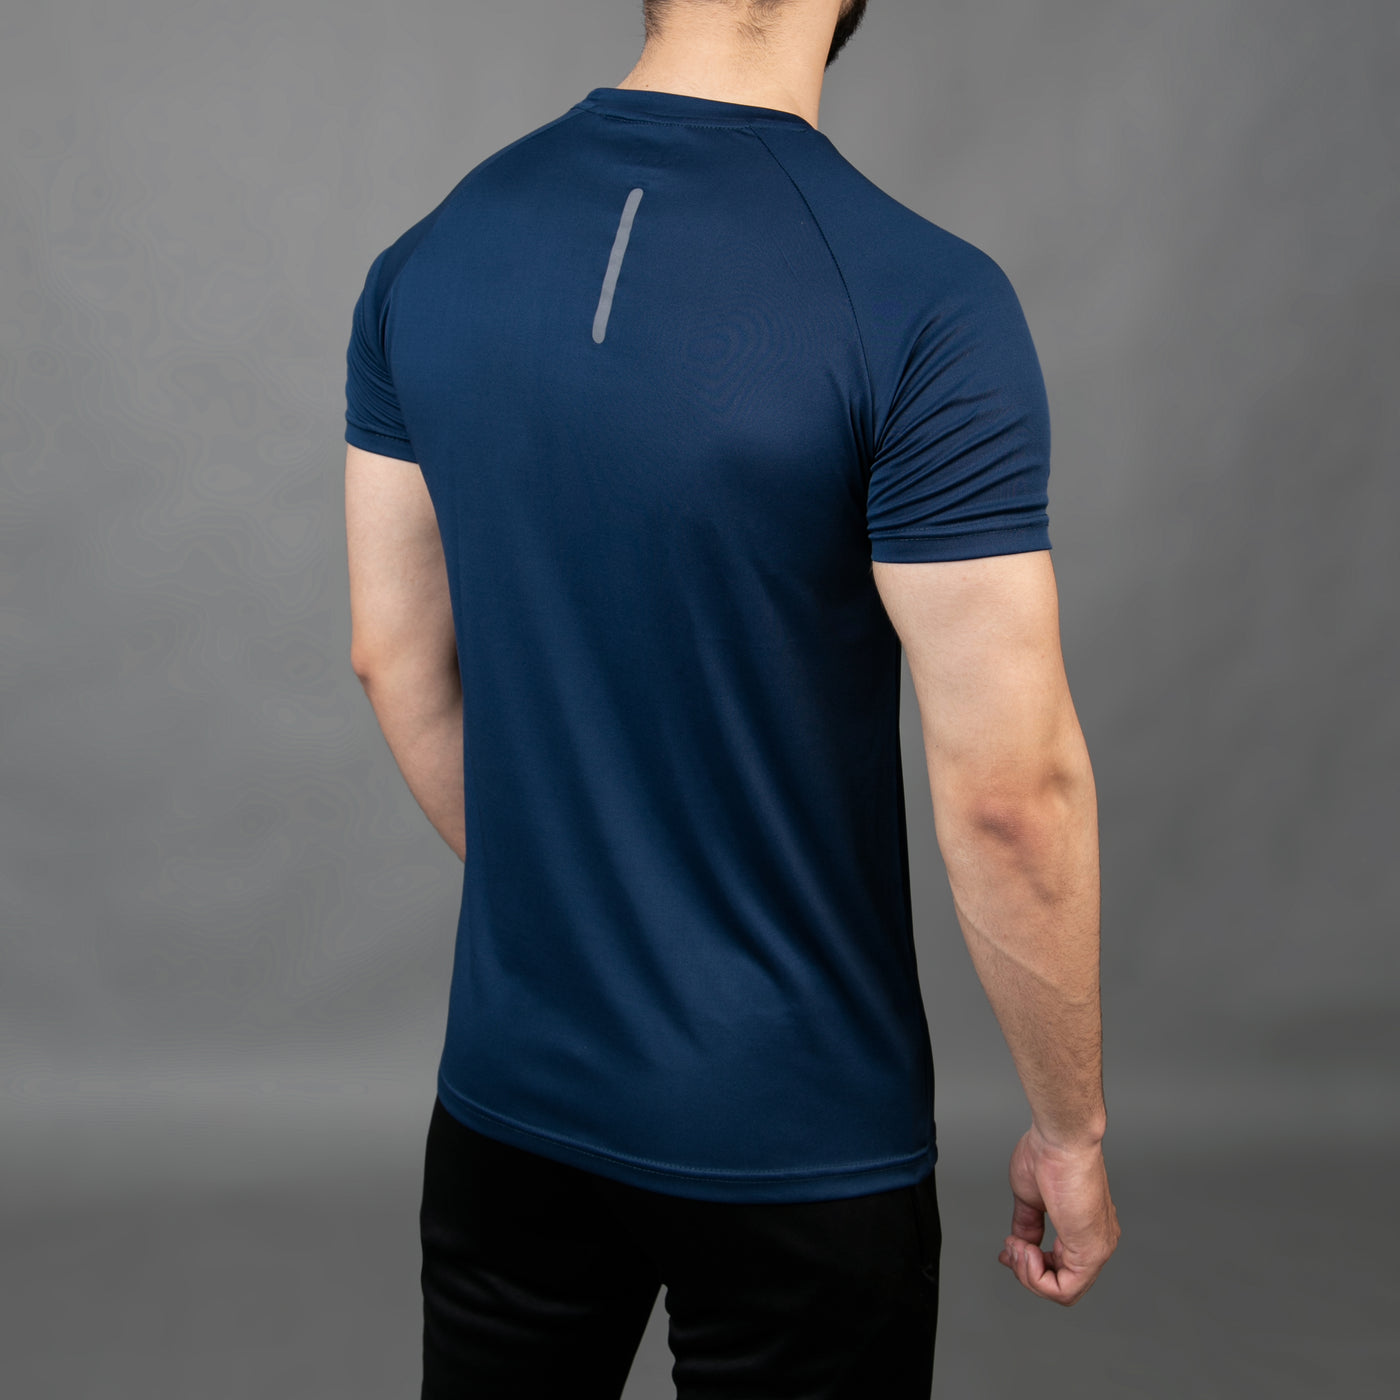 Premium Sapphire Quick Dry Tee with Reflective Detailing